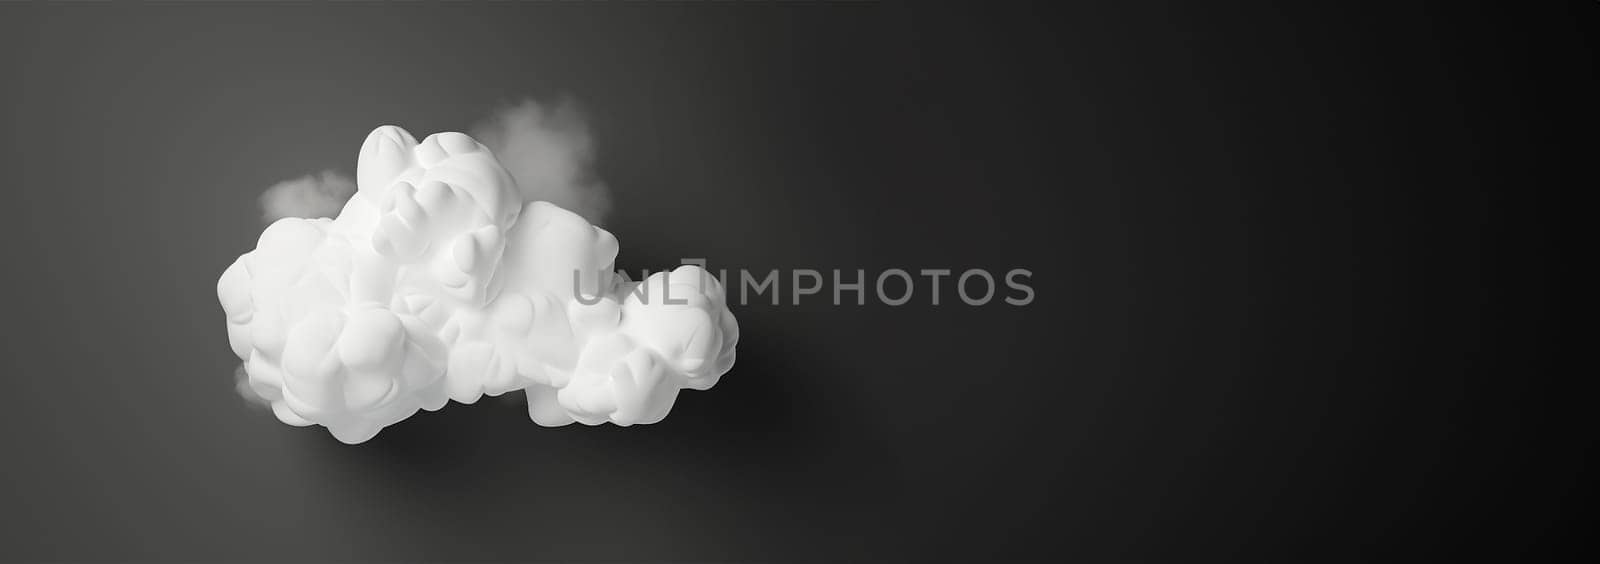 White 3d cartoon cloud black background. cartoon clouds on dark background. Various white cloud shapes for games, animations, web. illustration Copy space Space for text